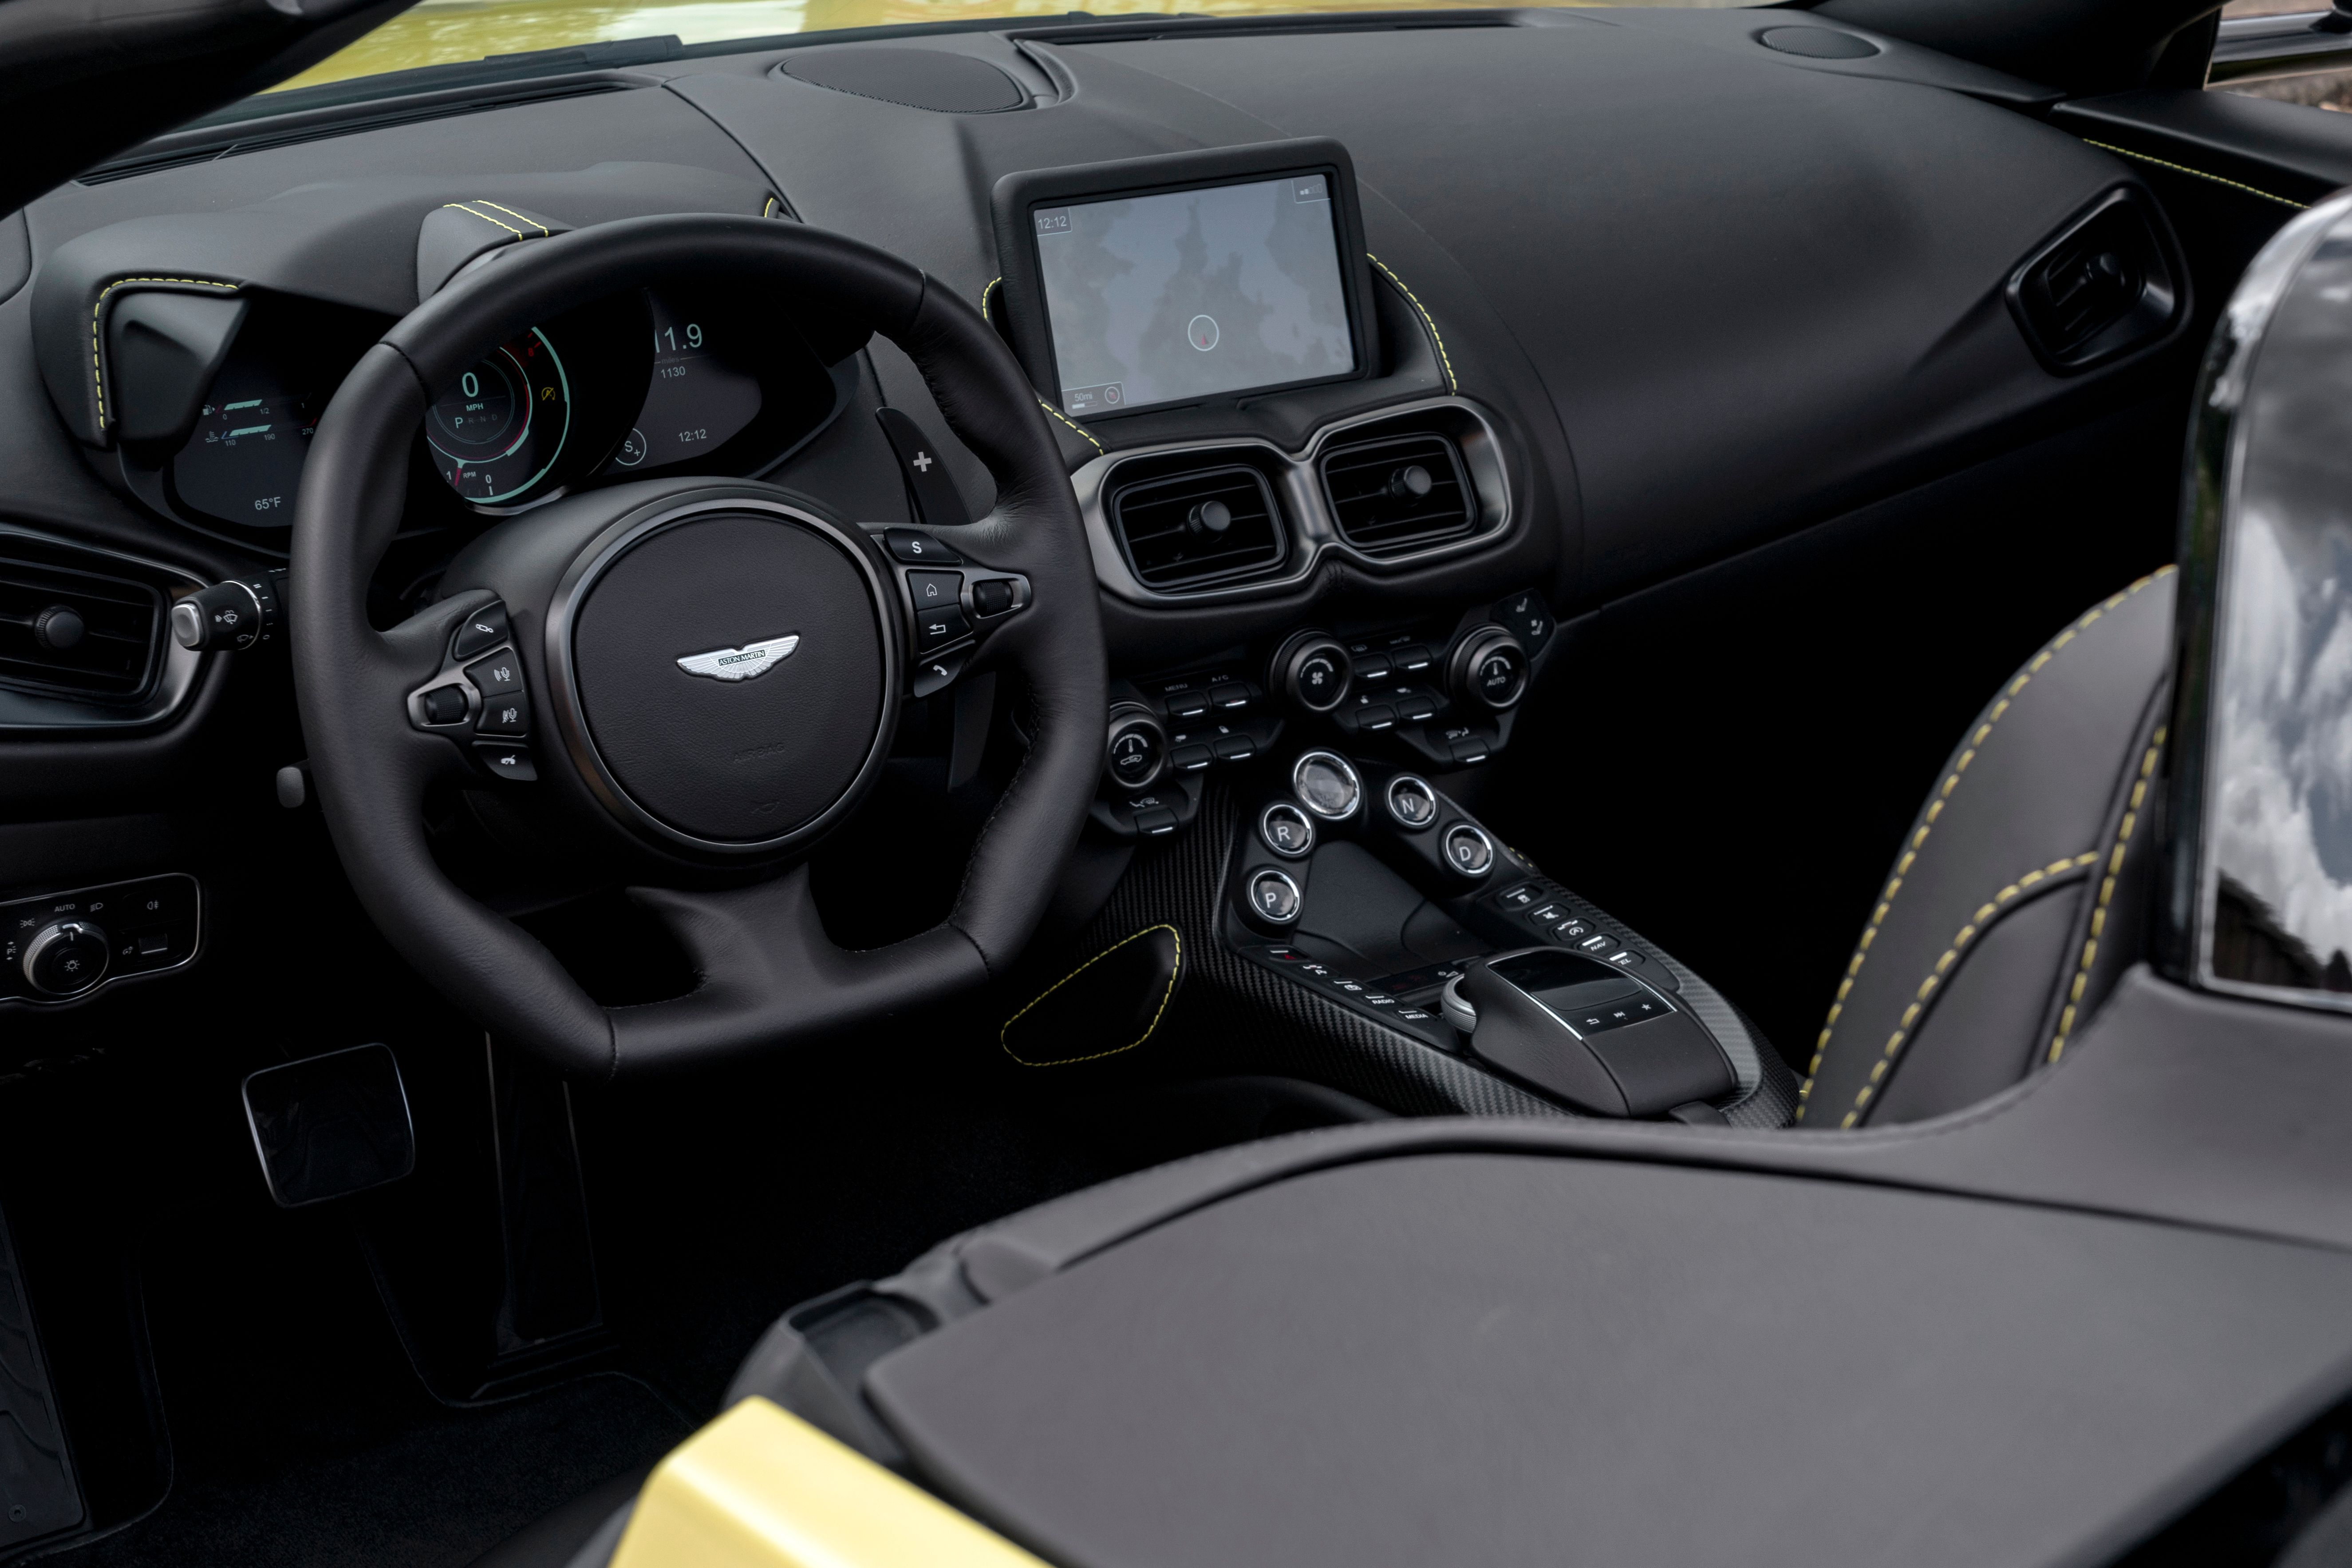 The interior of the Vantage Roadster from the driver's side